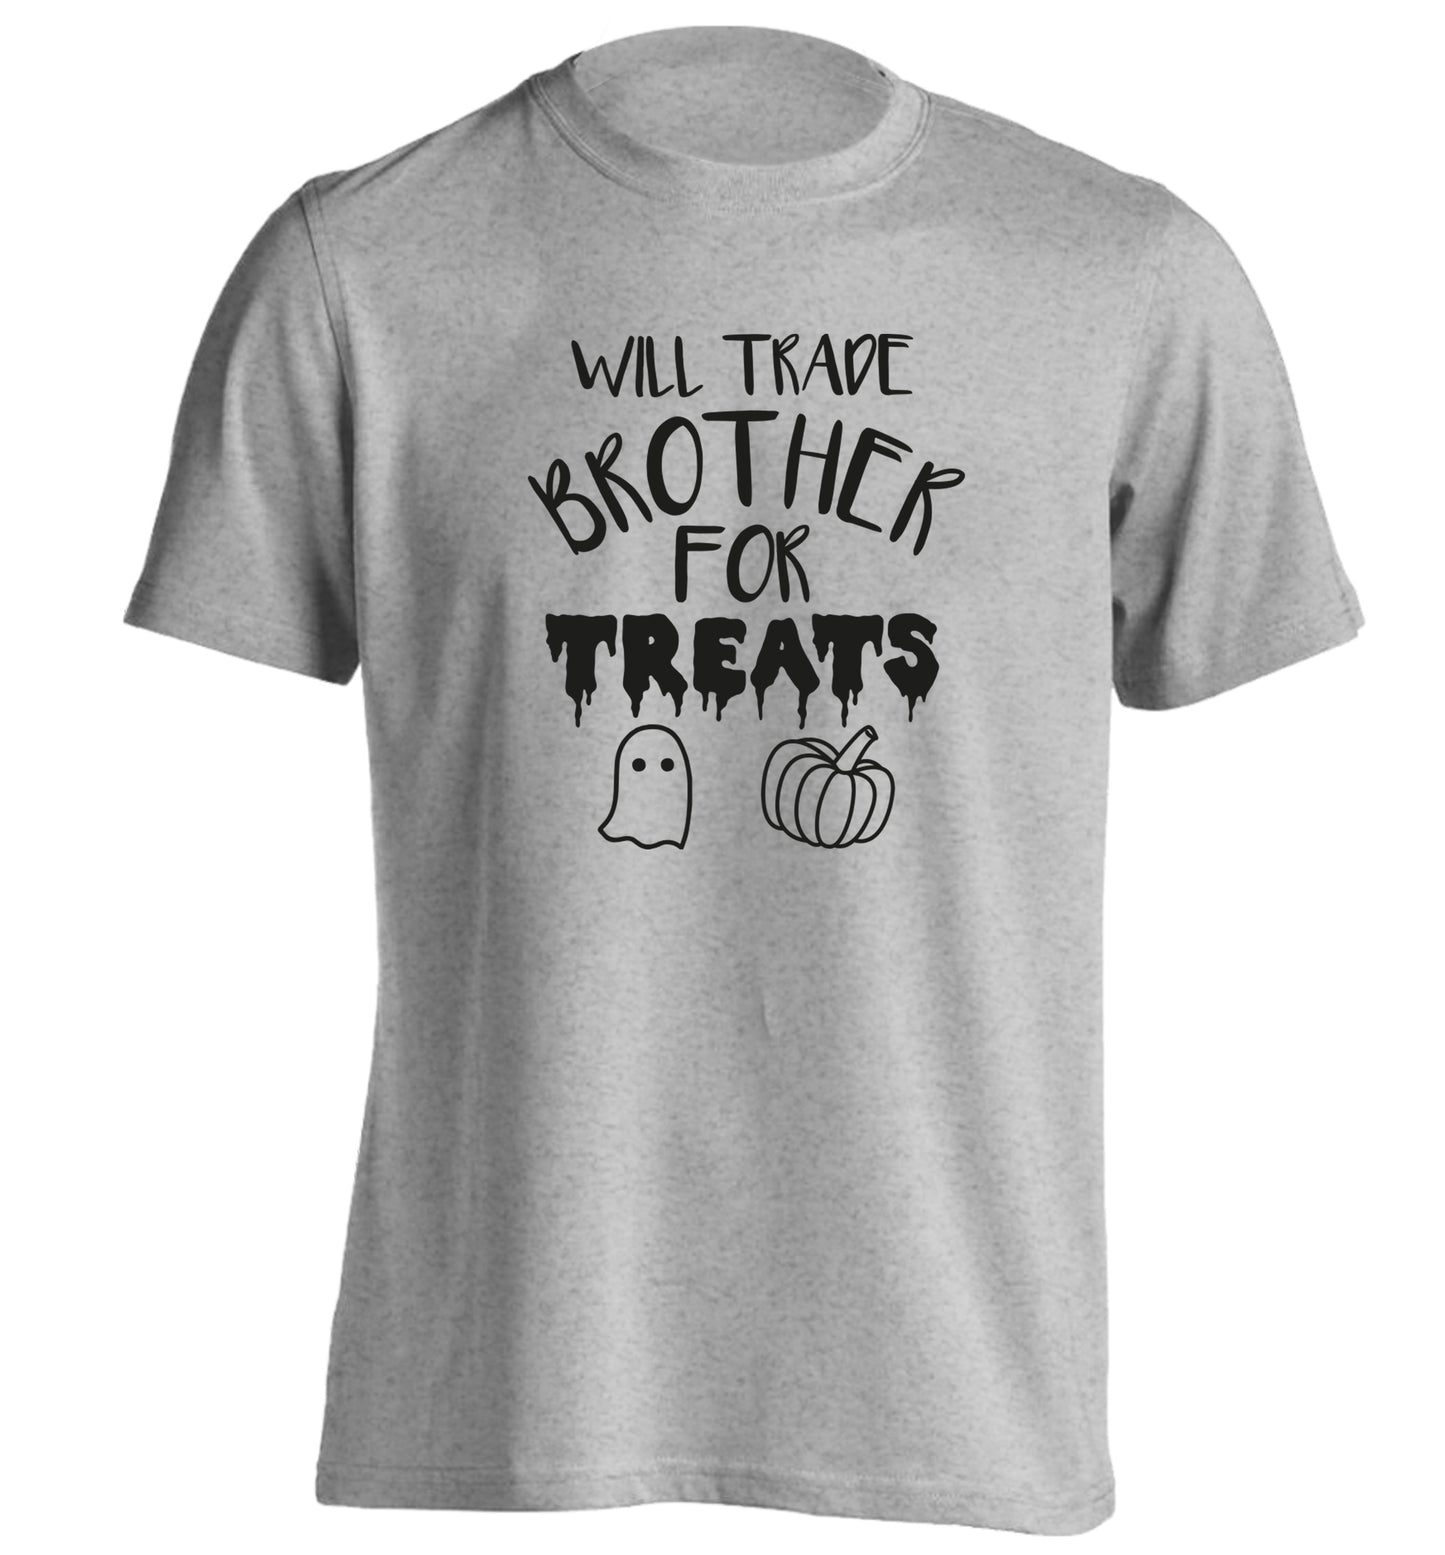 Will trade brother for sweets adults unisex grey Tshirt 2XL